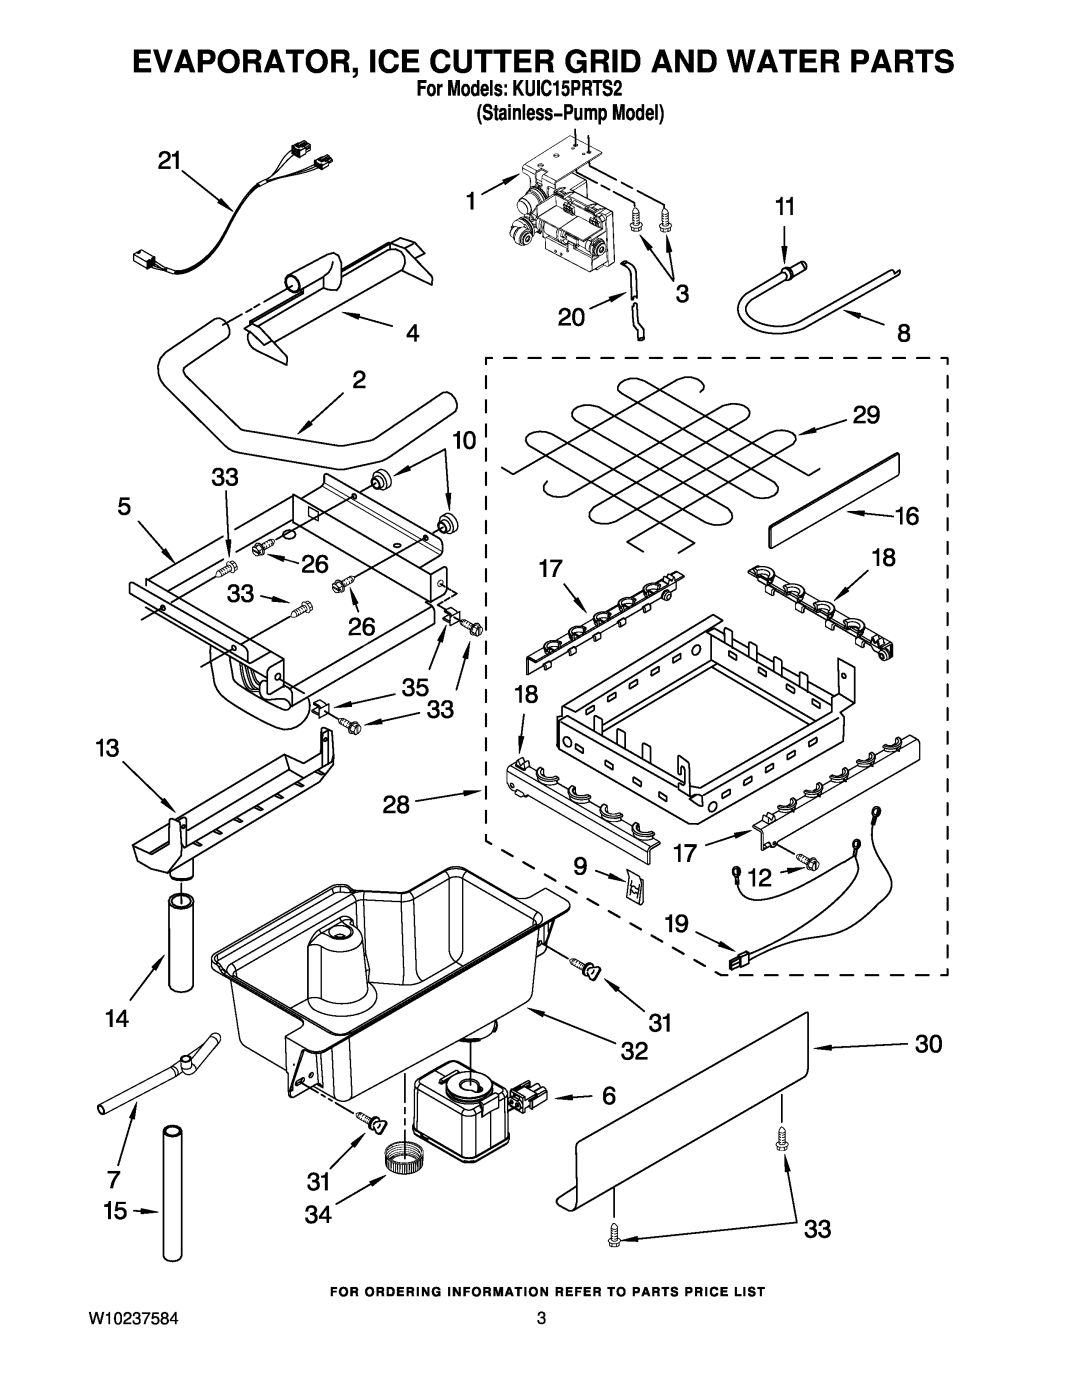 KitchenAid manual Evaporator, Ice Cutter Grid And Water Parts, W10237584, For Models KUIC15PRTS2 Stainless−Pump Model 